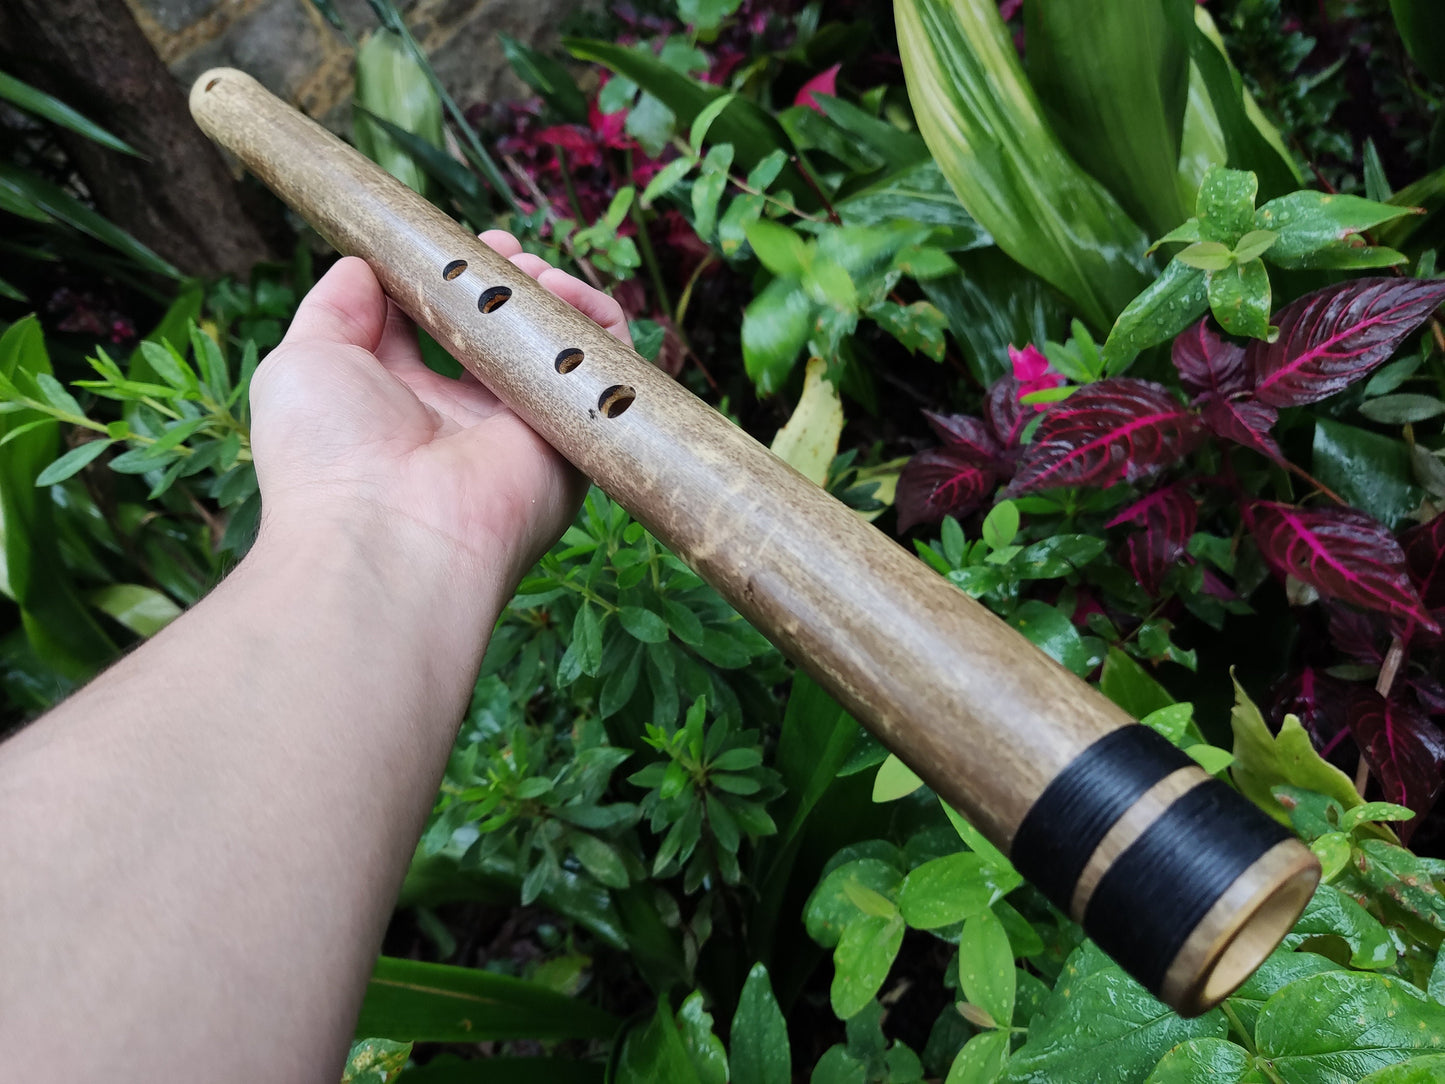 Egyptian Flute in Eb. Handmade bamboo flute with an exotic scale | Sopro Flutes